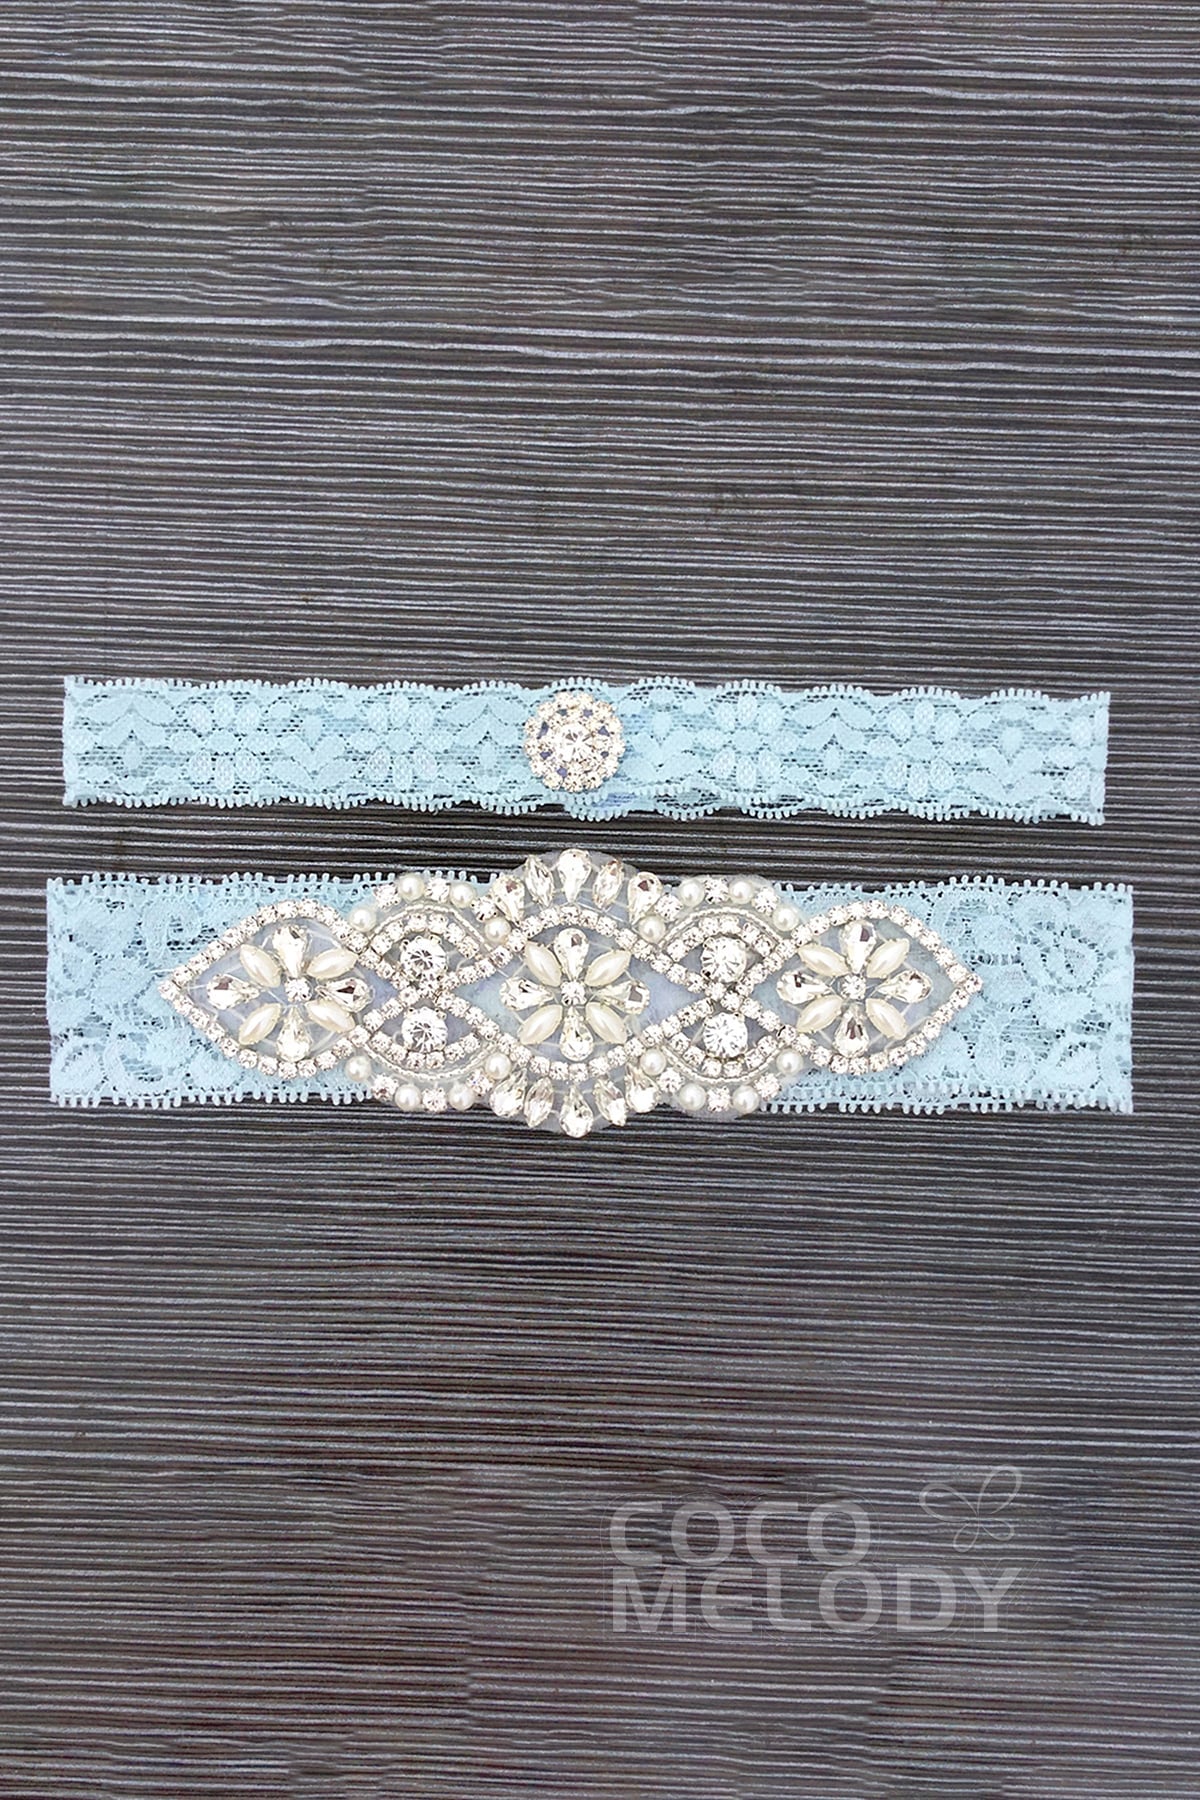 Lace Wedding Garter with Diamond and Pearls WD17019